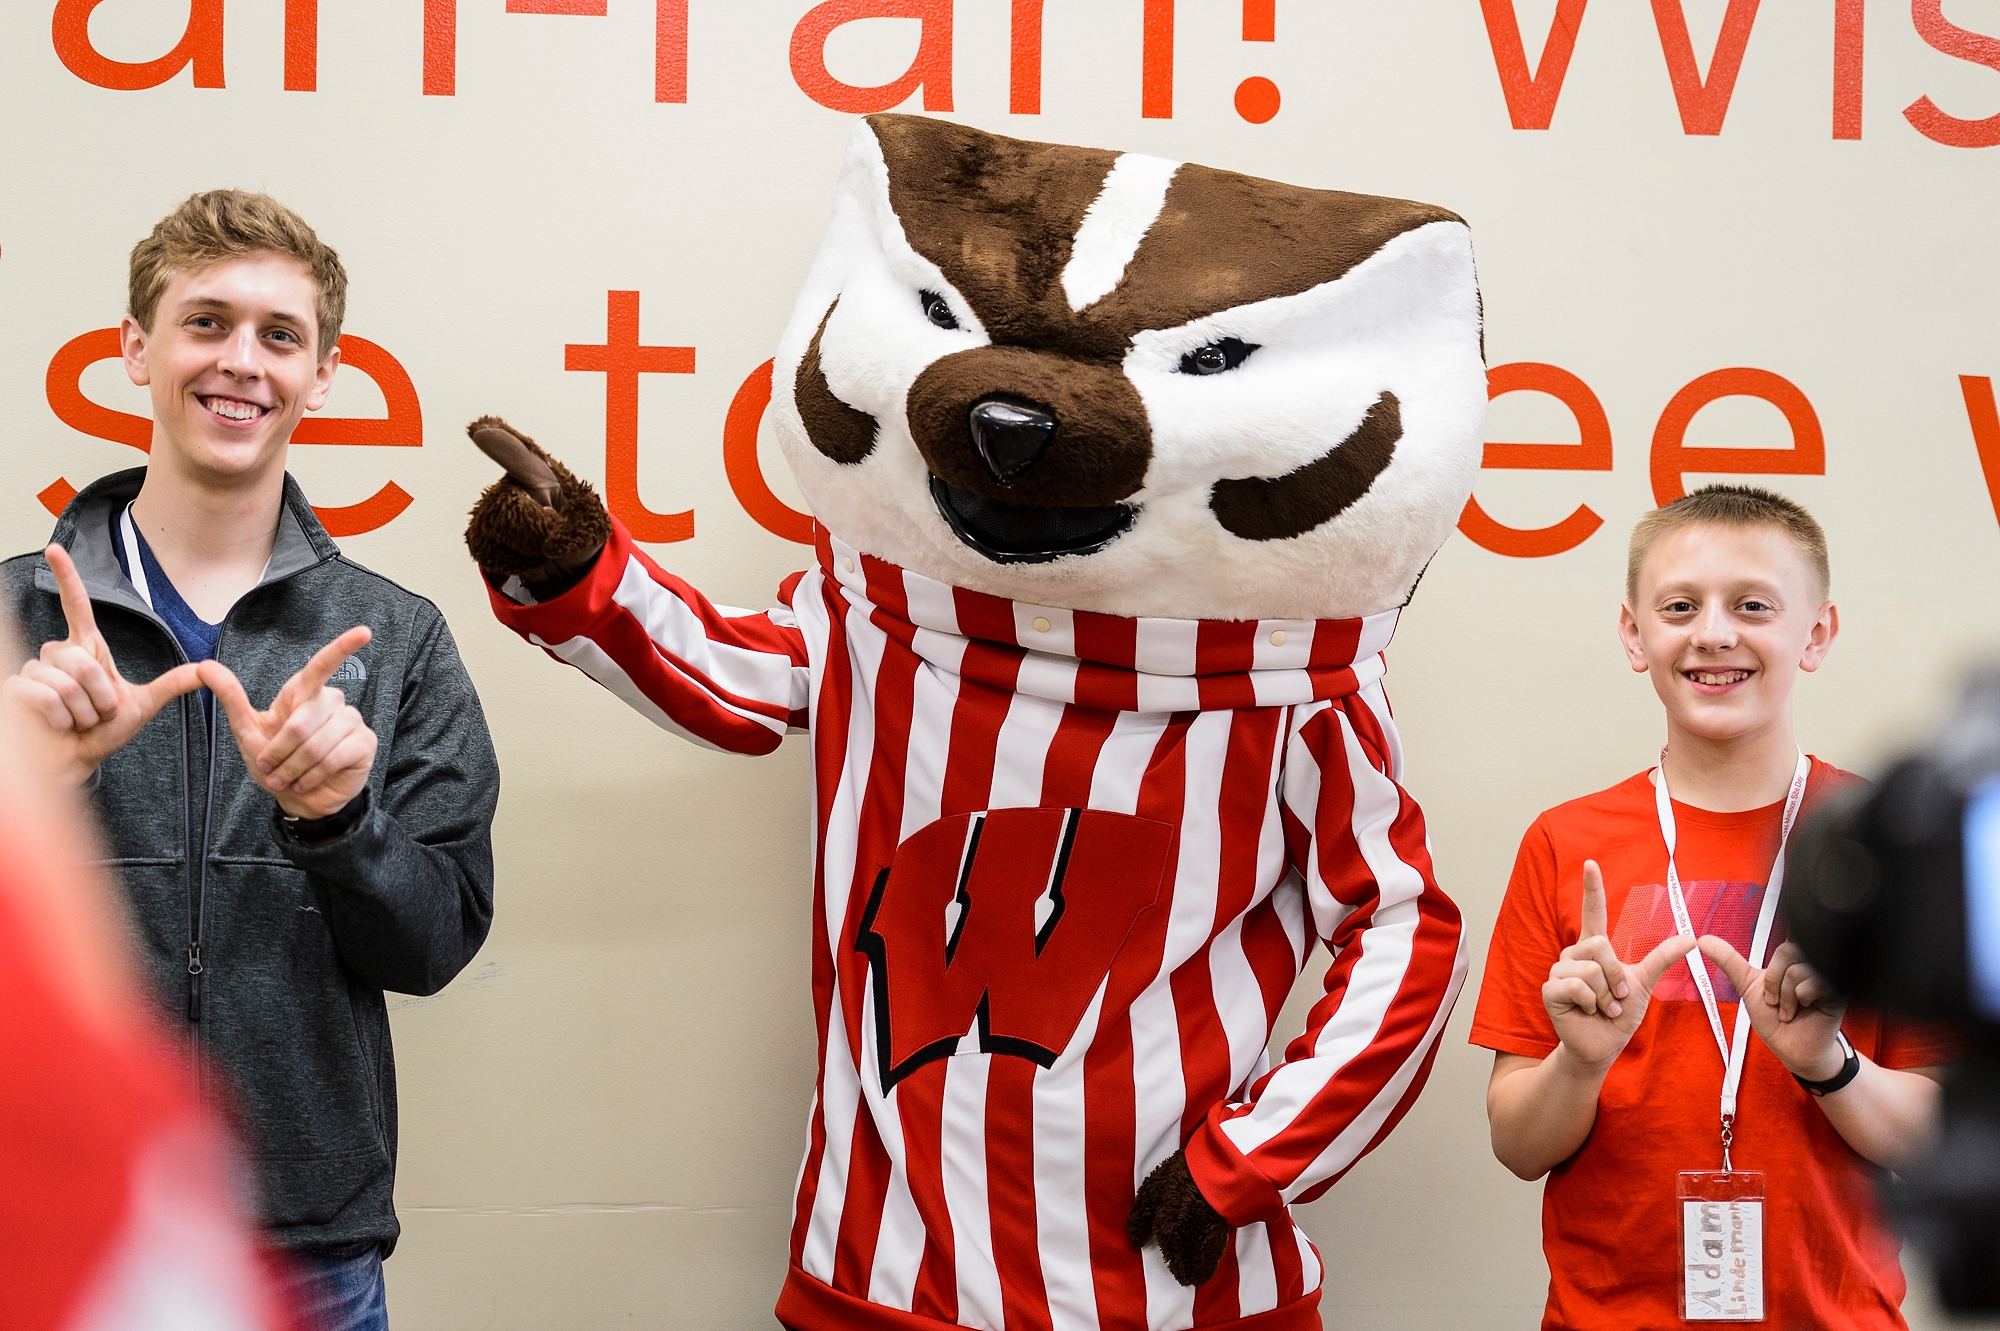 Undergraduate Jacob Lindemann and his brother Adam, 13, of Manitowoc, pose for a photo with mascot Bucky Badger at Union South during Sibs Day activities.